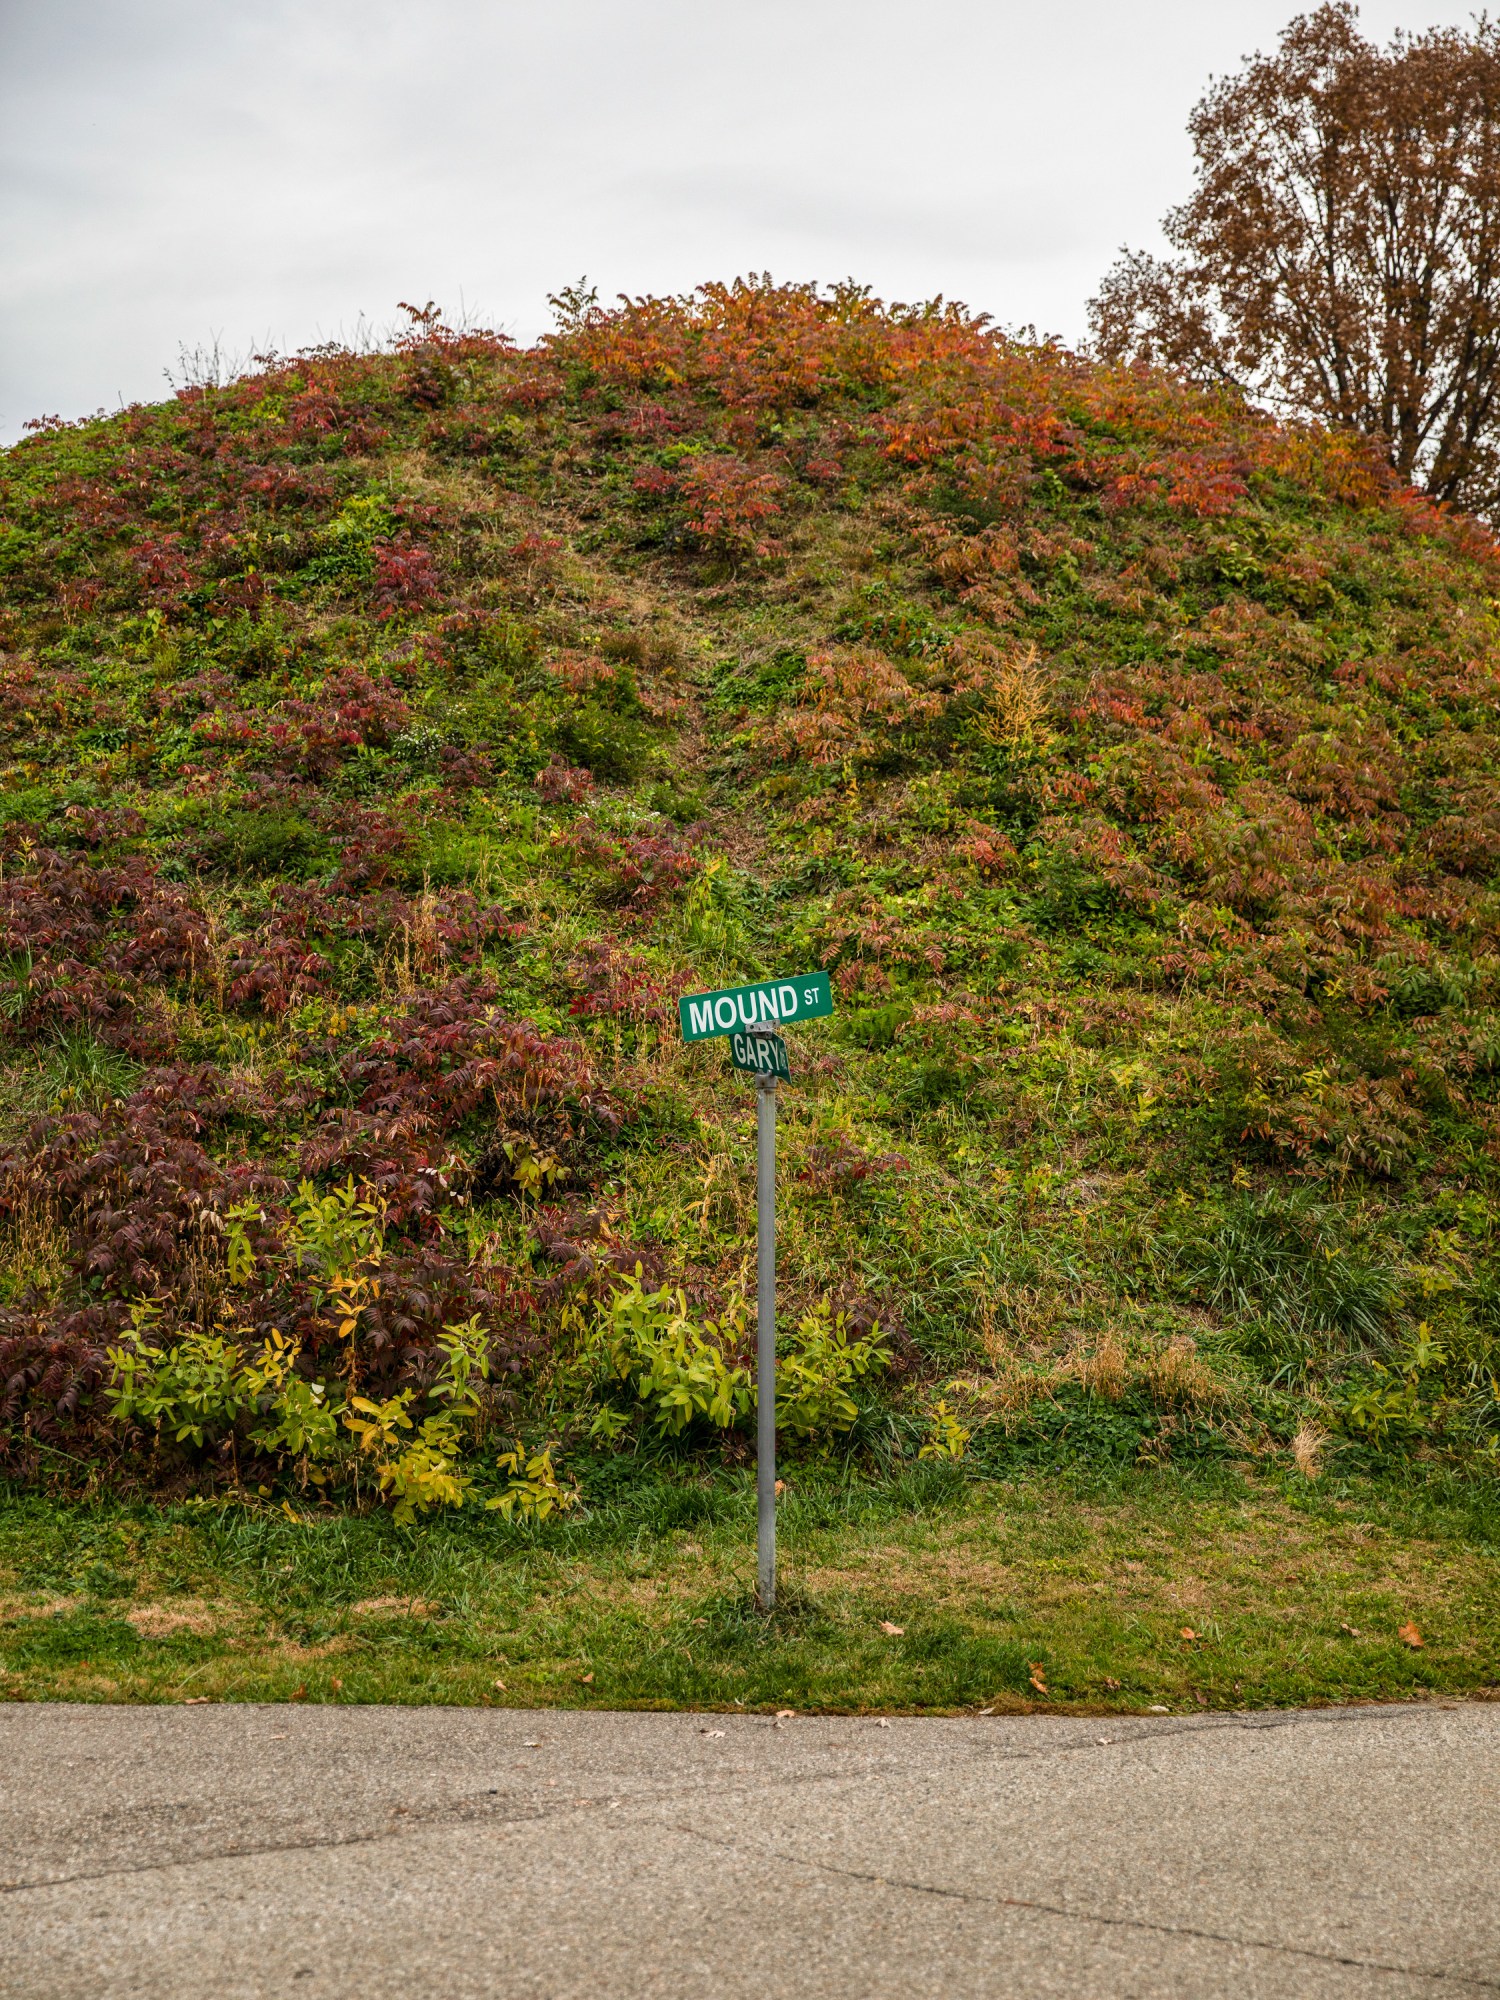 The Hartman Mound in The Plains, OH on October 30, 2022.